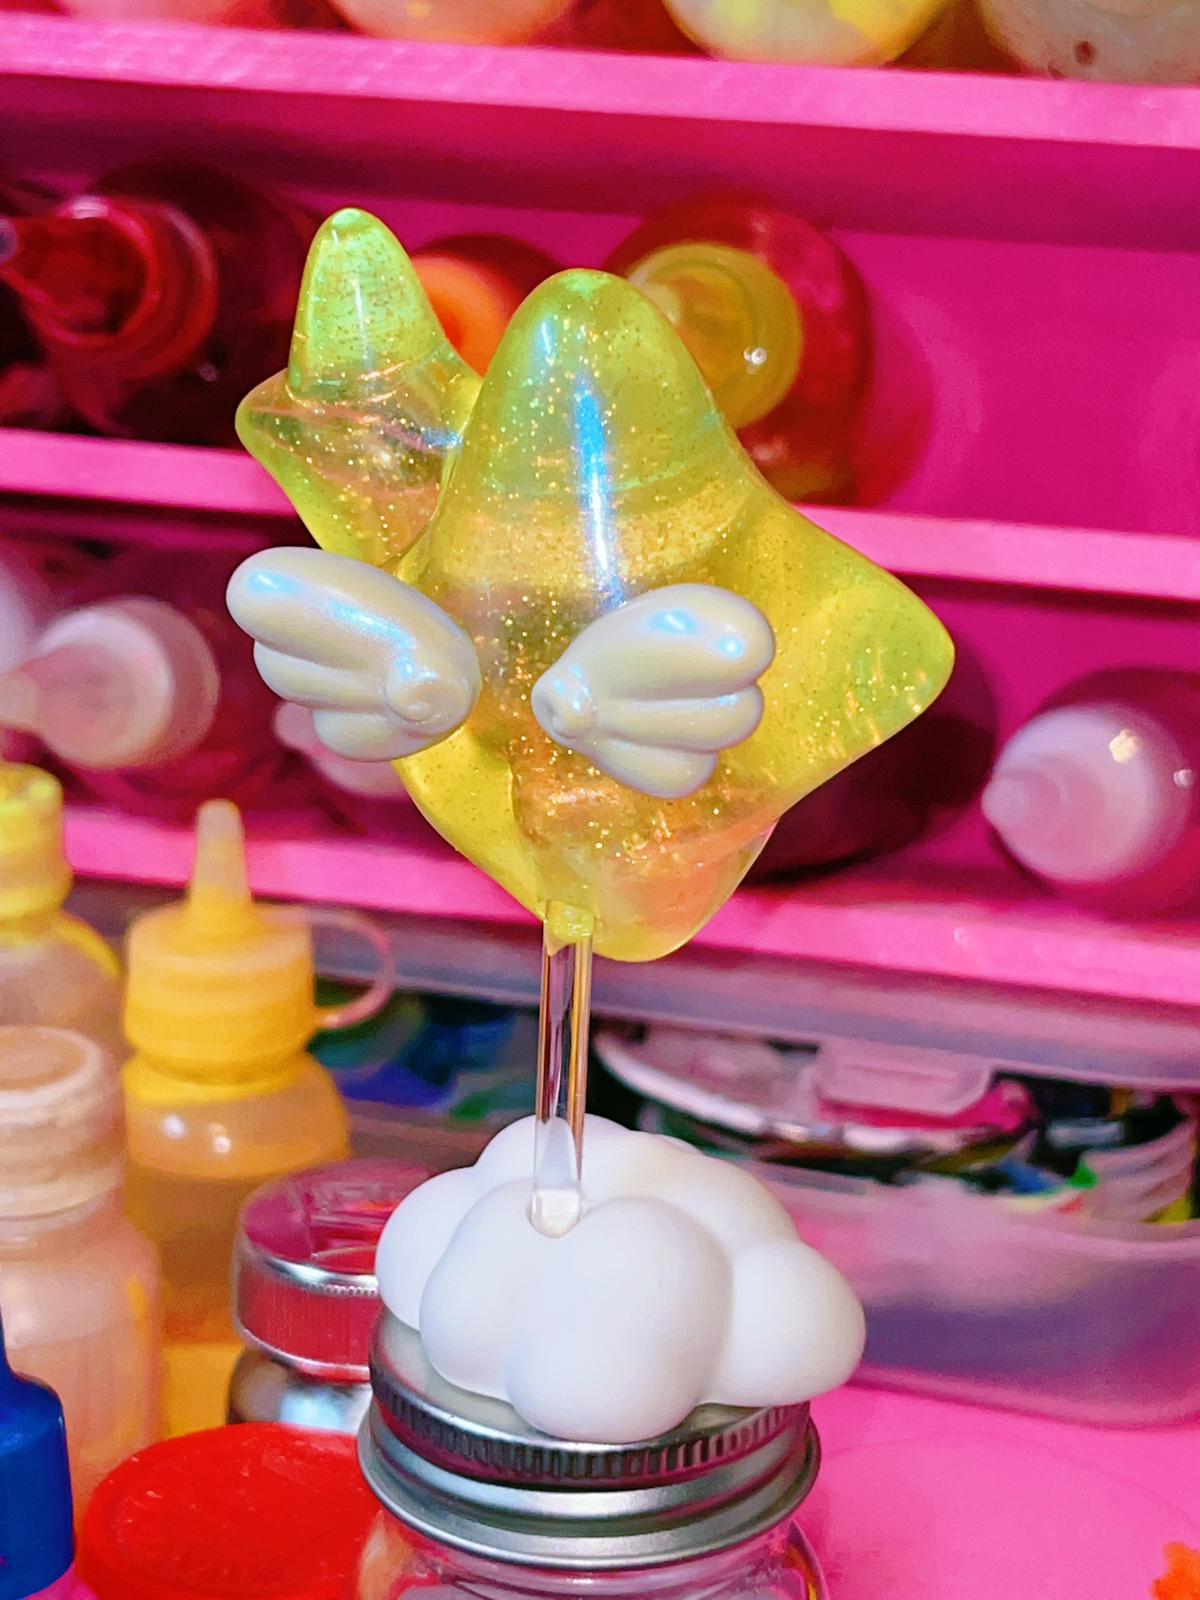 Bling baby Yellow by Kiwi resin toy on a stick with star shape and wings.